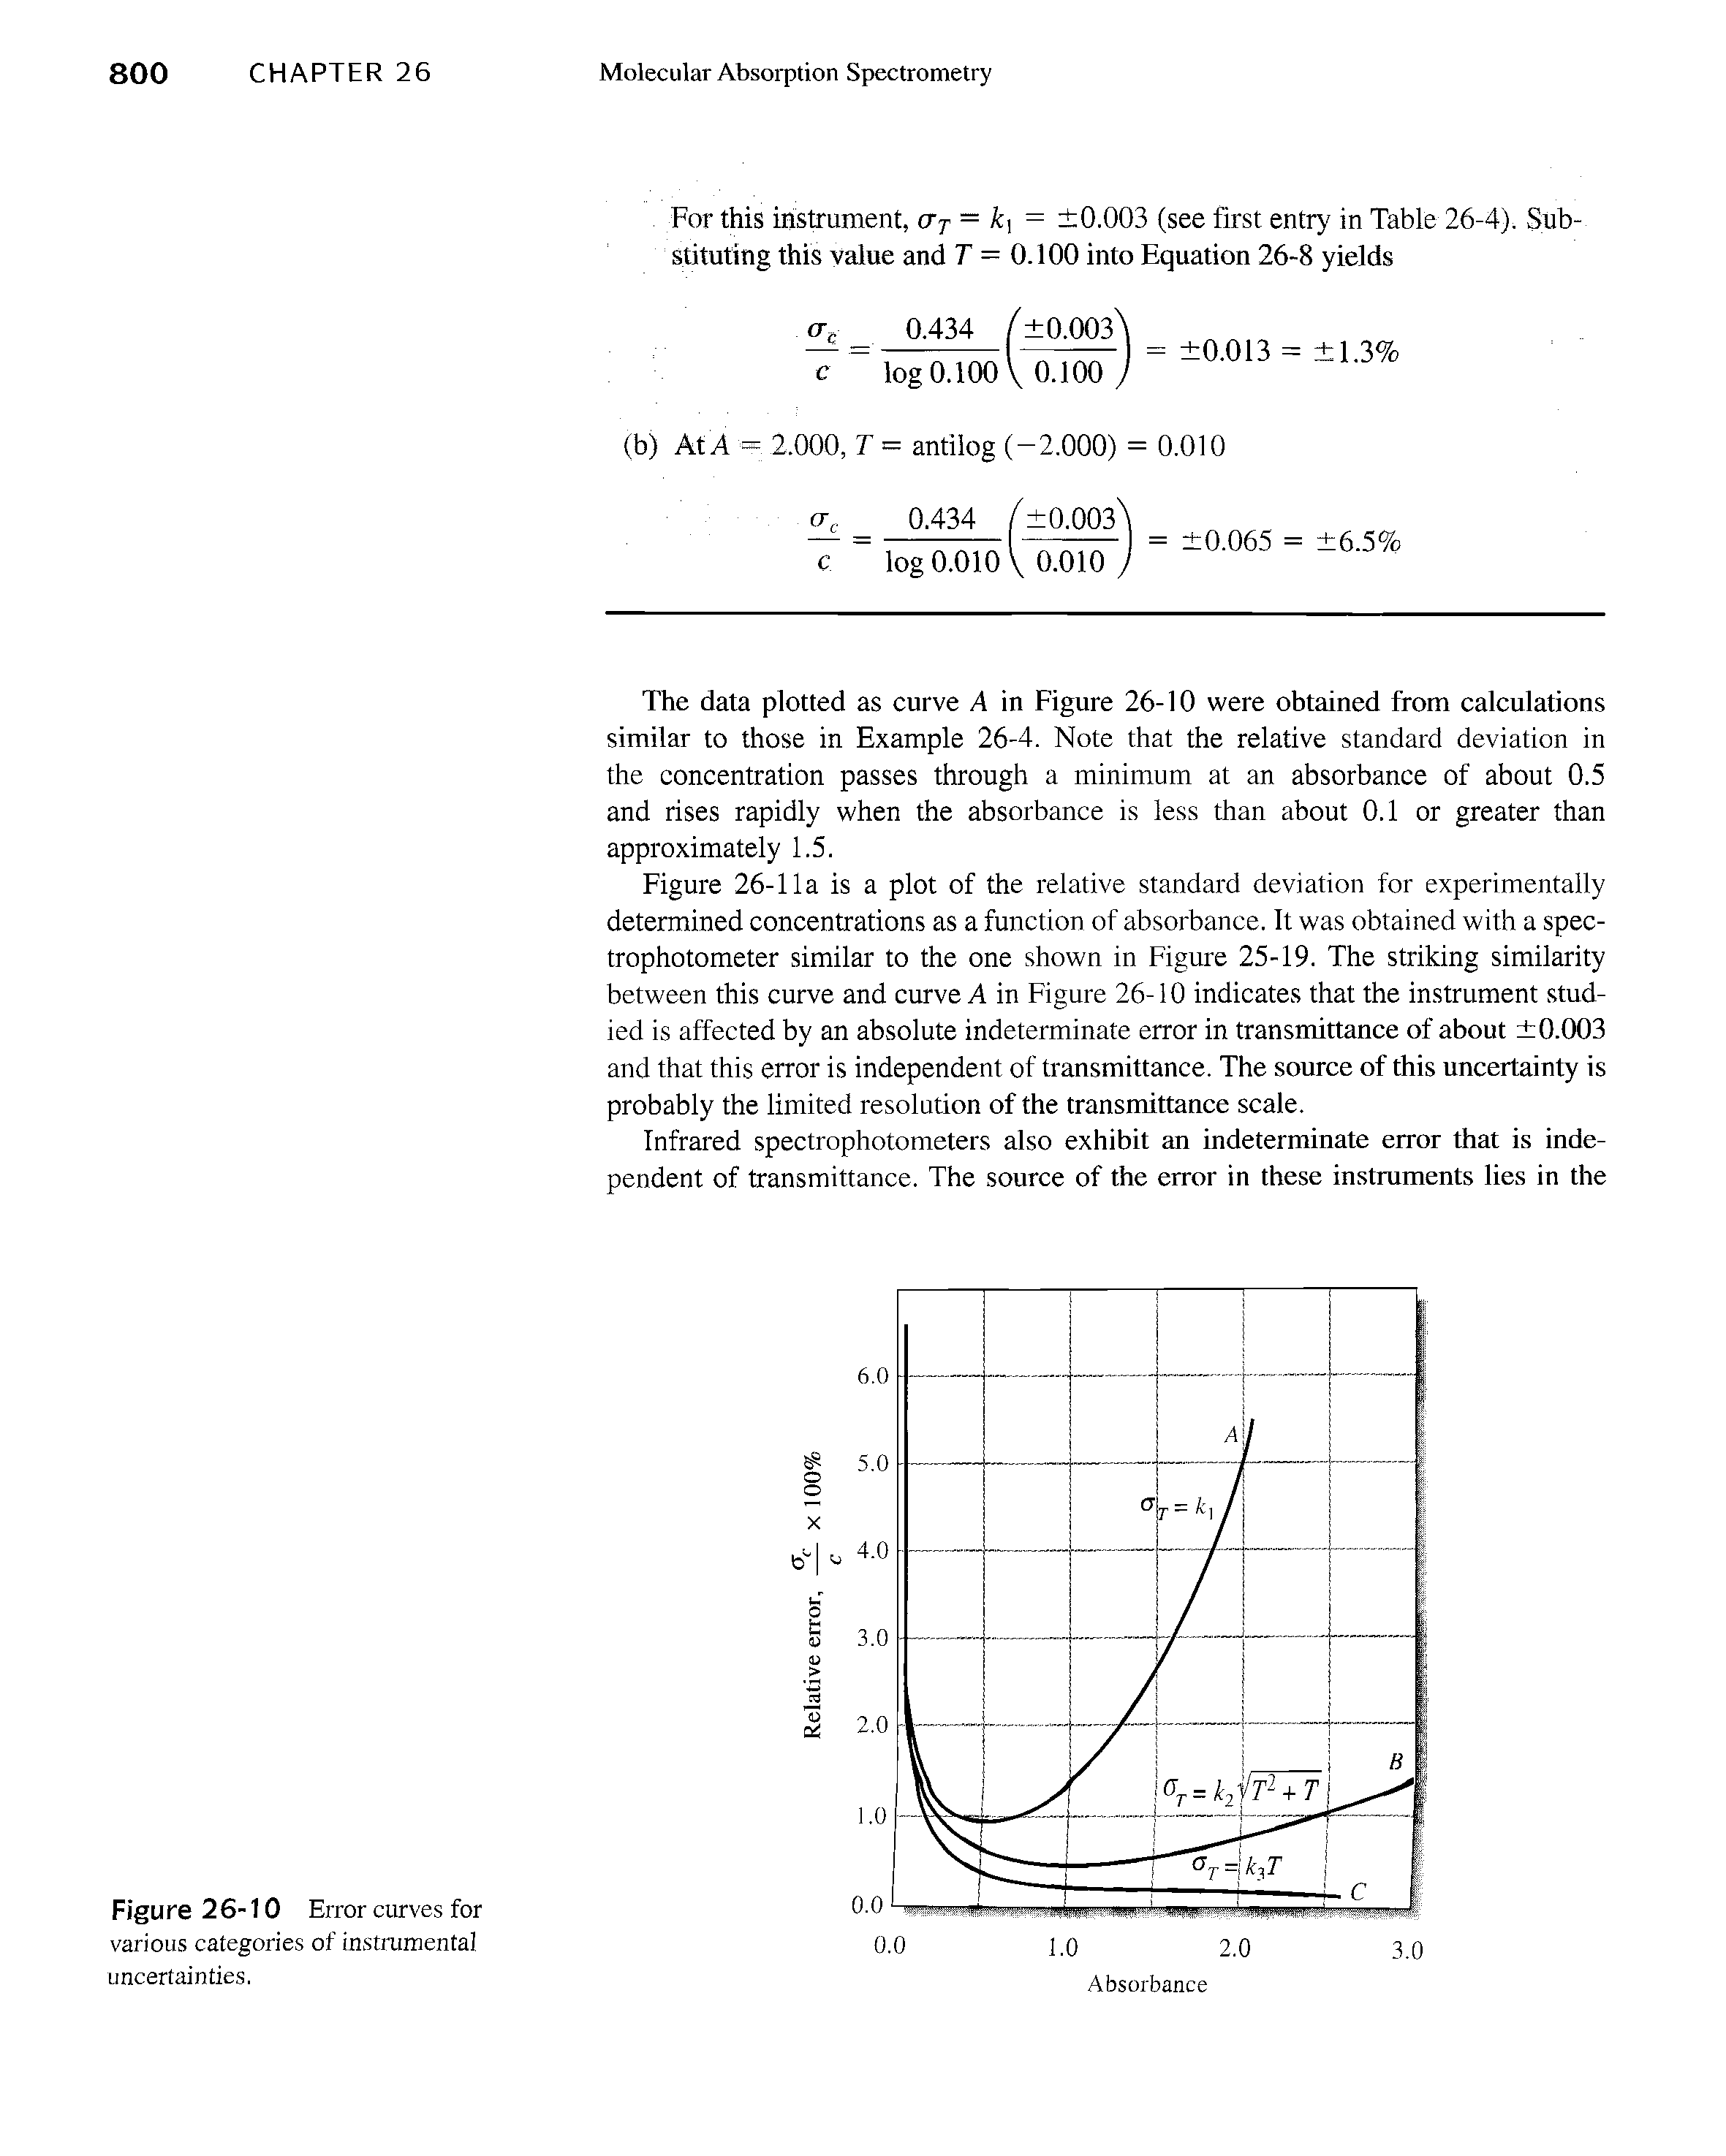 Figure 26-1 la is a plot of the relative standard deviation for experimentally determined concentrations as a function of absorbance. It was obtained with a spectrophotometer similar to the one shown in Figure 25-19. The striking similarity between this curve and curve A in Figure 26-10 indicates that the instrument studied is affected by an absolute indeterminate error in transmittance of about 0.003 and that this error is independent of transmittance. The source of this uncertainty is probably the limited resolution of the transmittance scale.